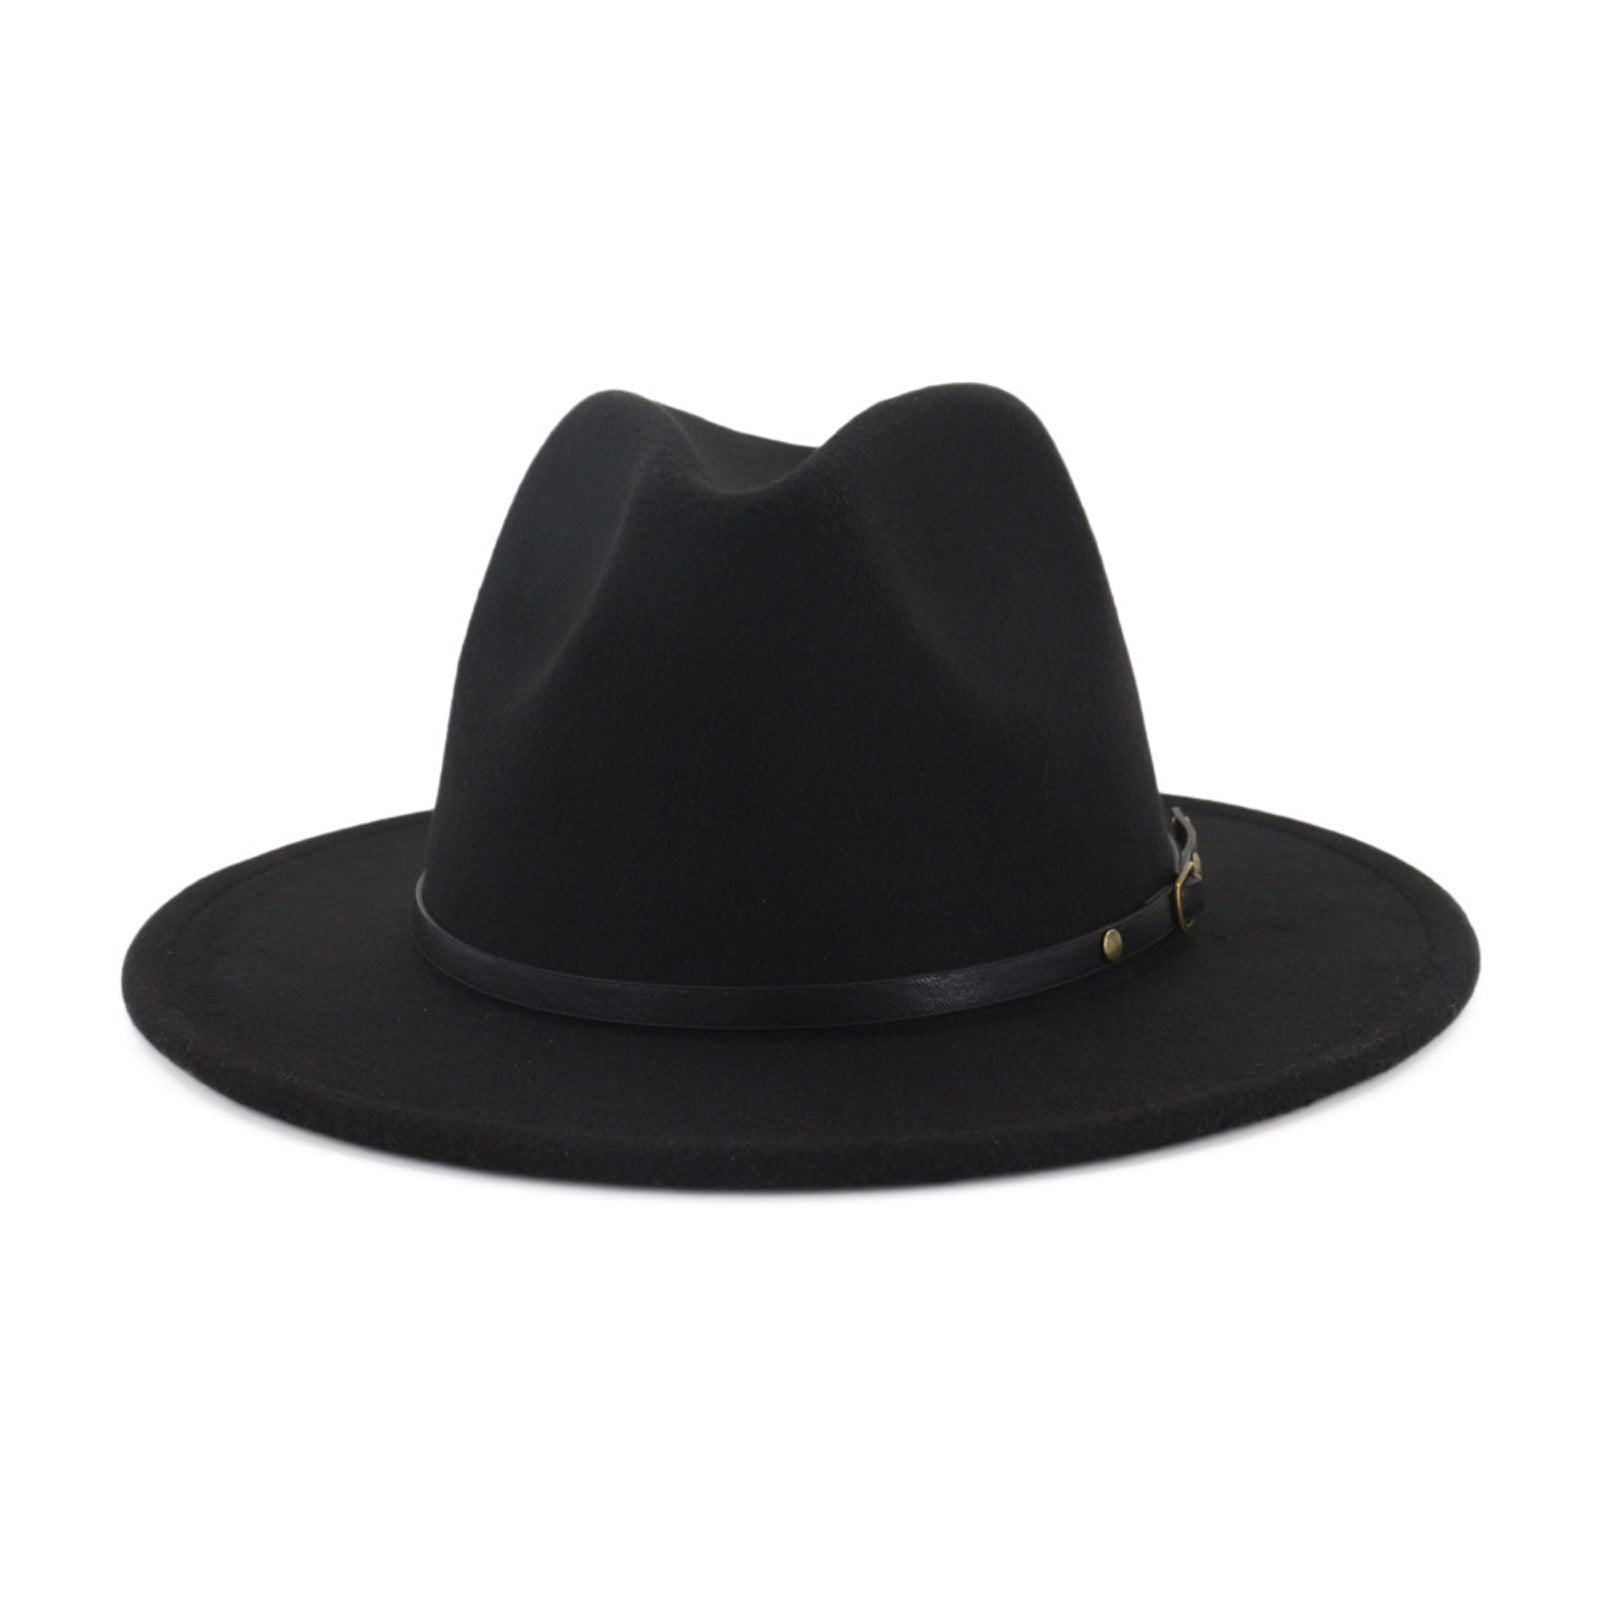 Fast Shipping USA Seller Black And Pink Under Two Tone Fedora Hat Unisex Cowboy